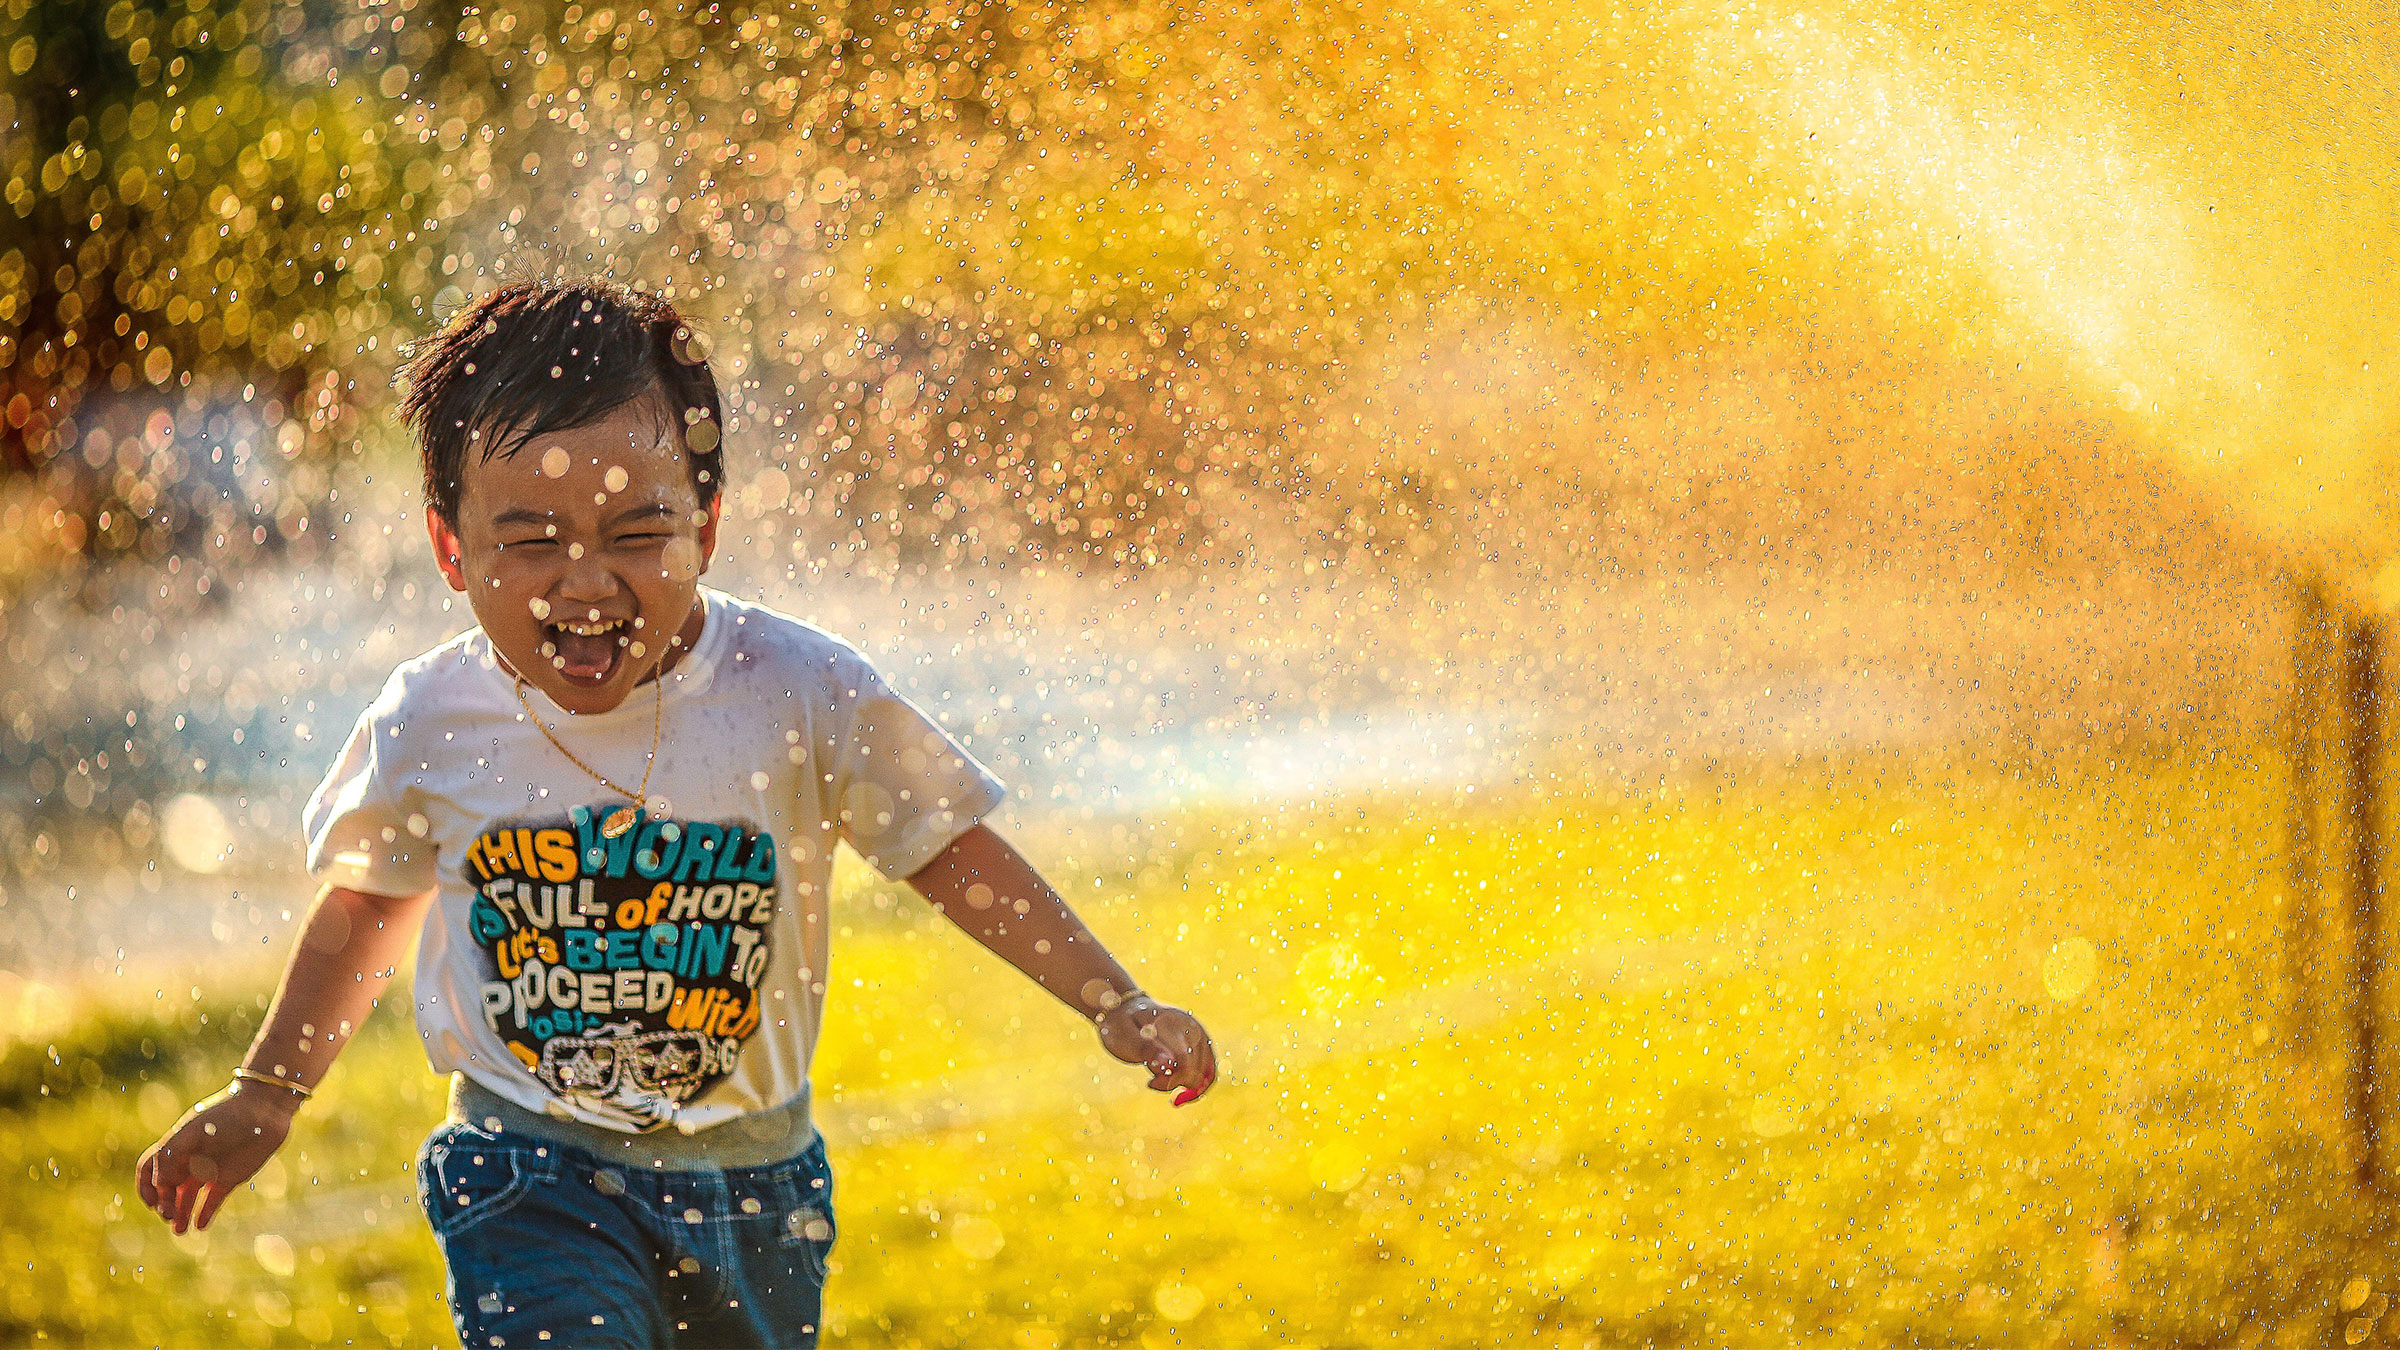 A preschool aged boy plays in a water sprinkler with bright sunlight shining